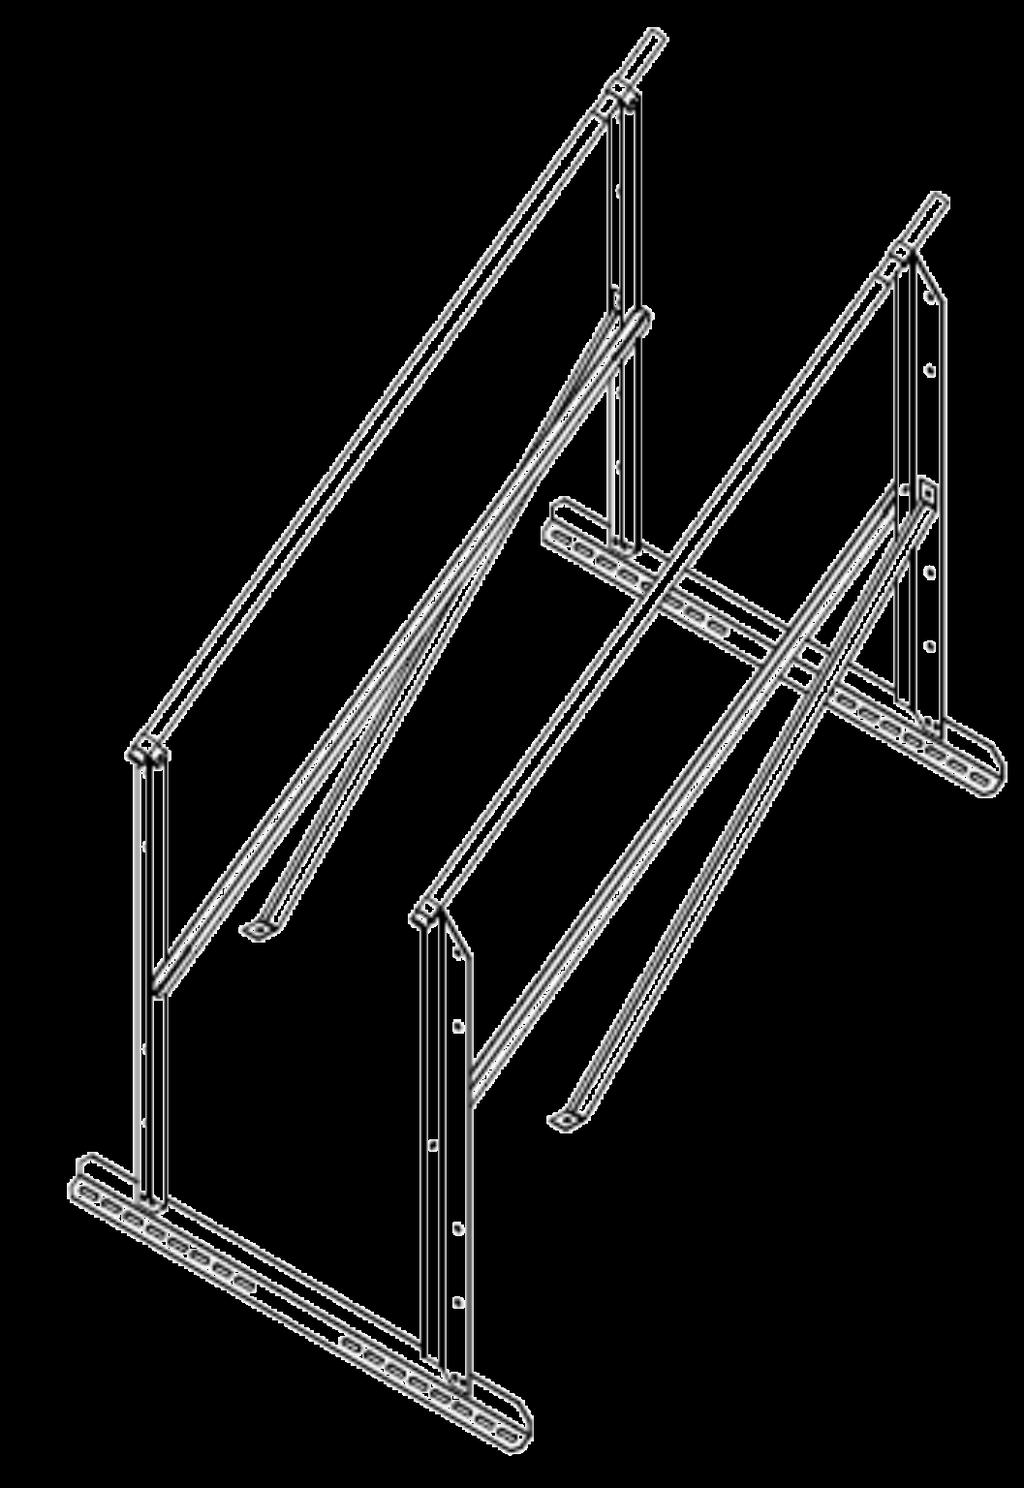 Roof Packages Easy Step Roof Ladder Handrail Illustration depicts ES61100, ES61233, and 51450. Items are sold individually.